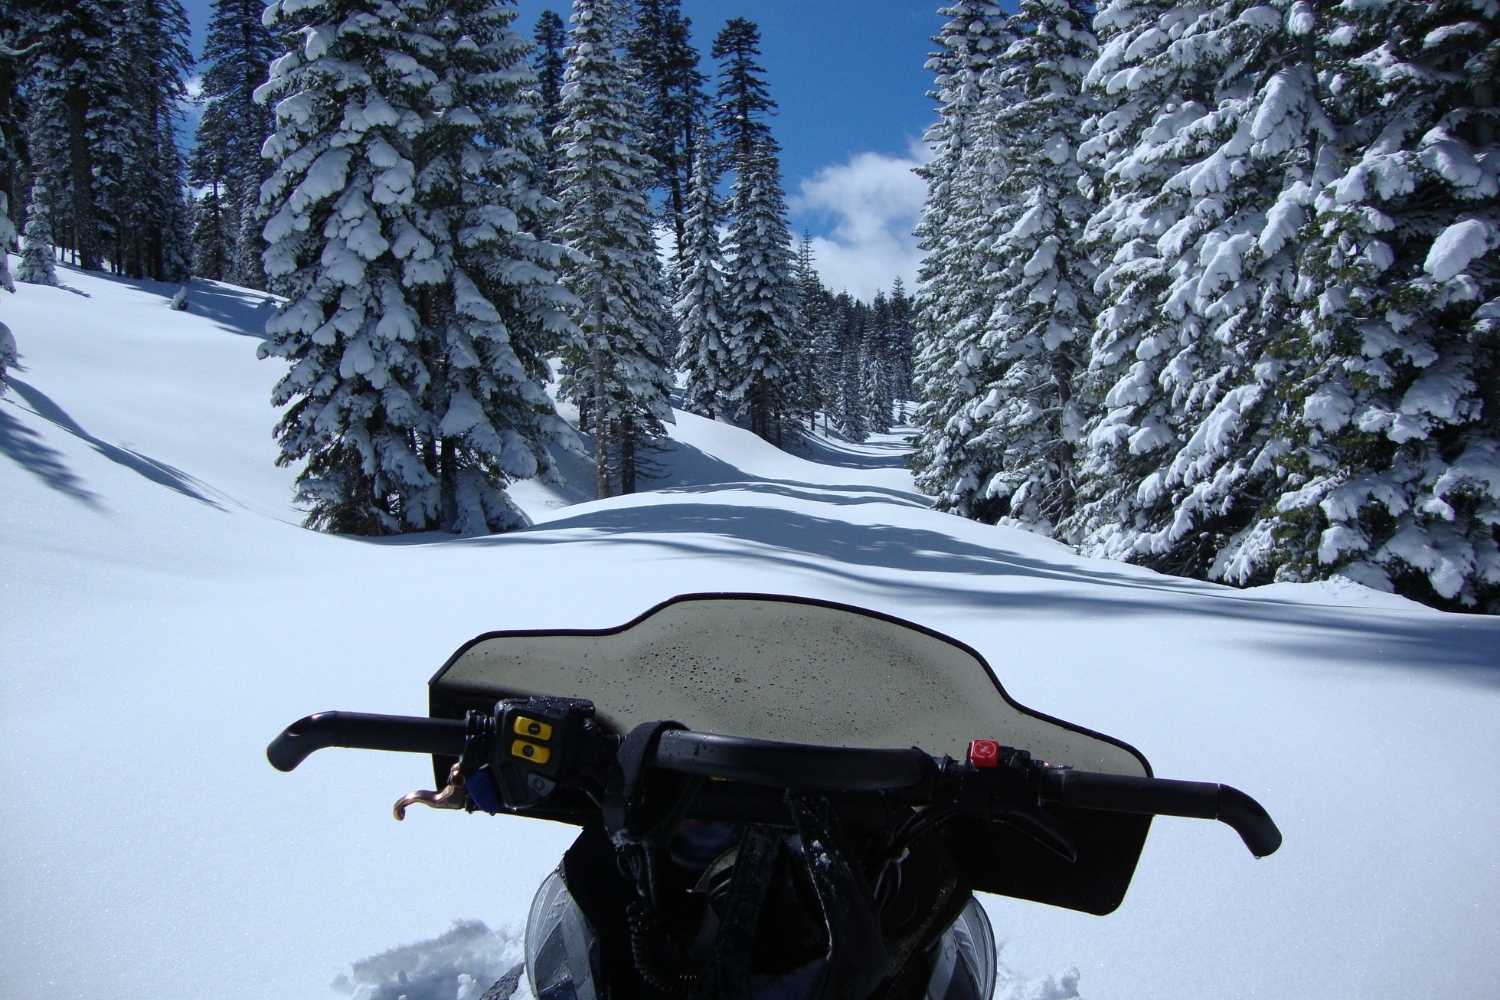 View of trail with fresh snow from snowmobile